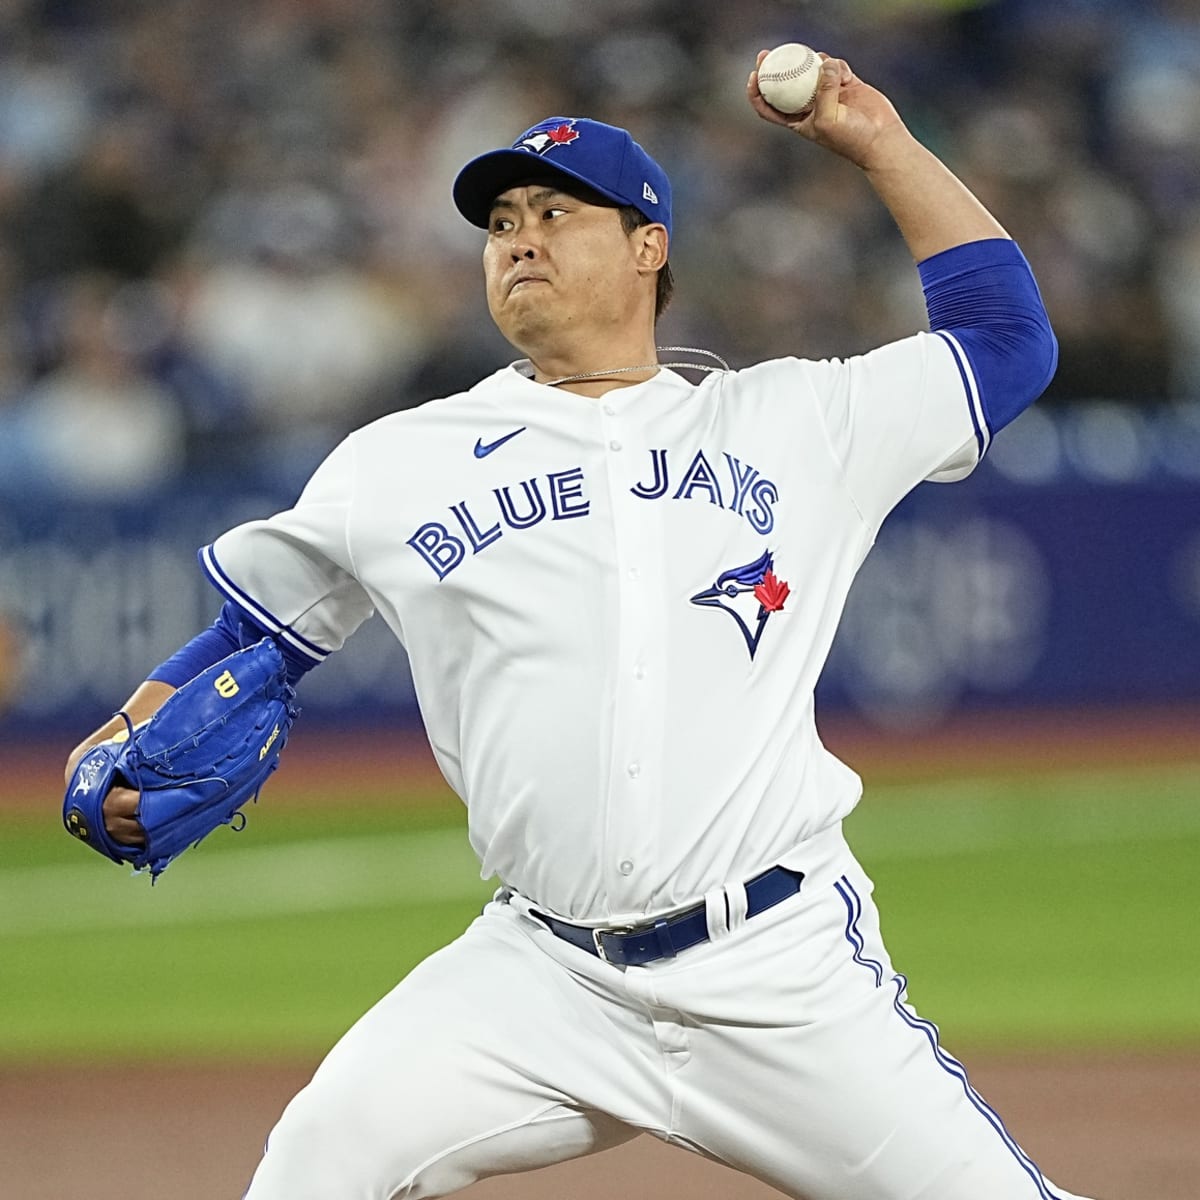 Blue Jays' Ryu Hyun-jin pleased with performance in no-hit start cut short